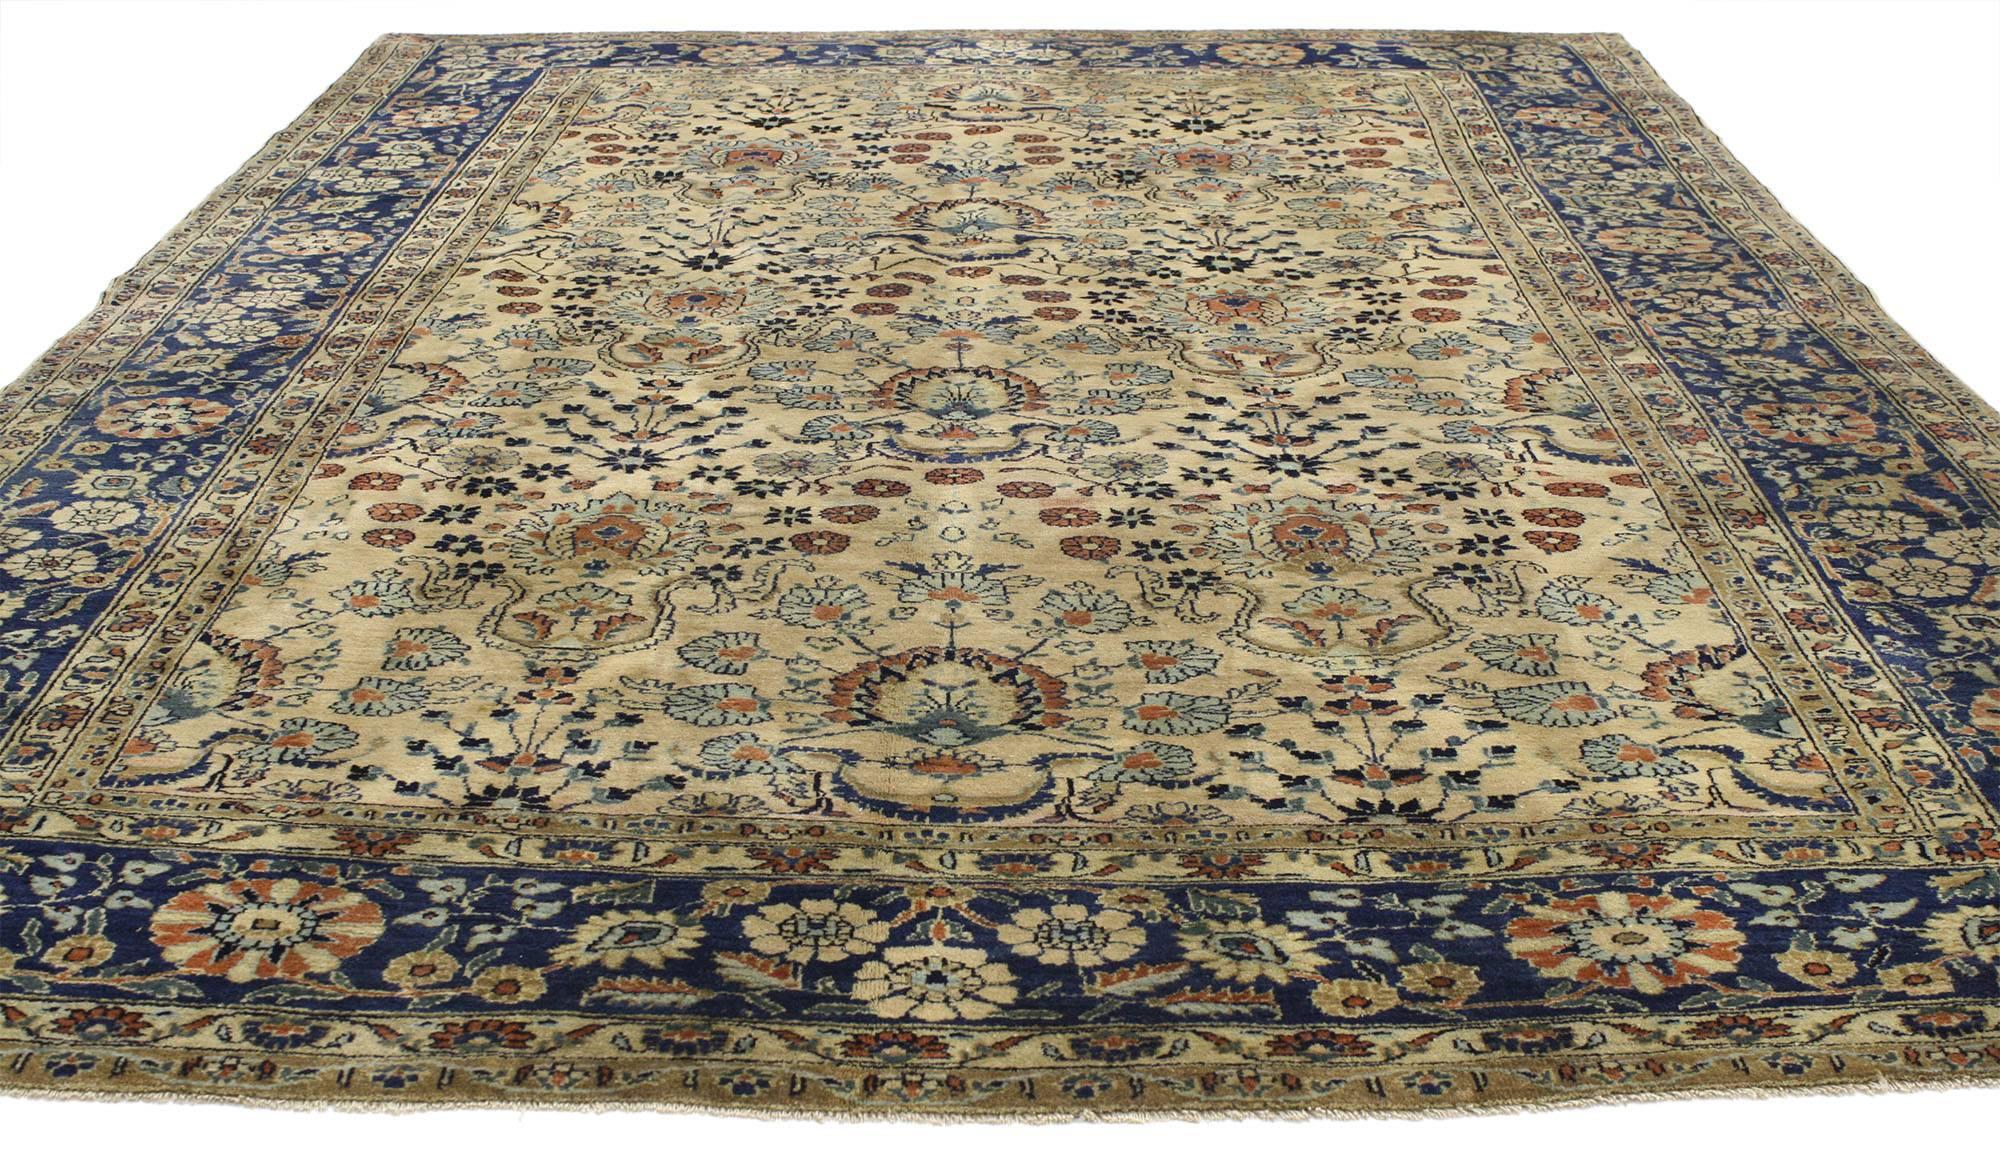 Sarouk Farahan Antique Persian Sarouk Rug with Italian Country Cottage Style For Sale